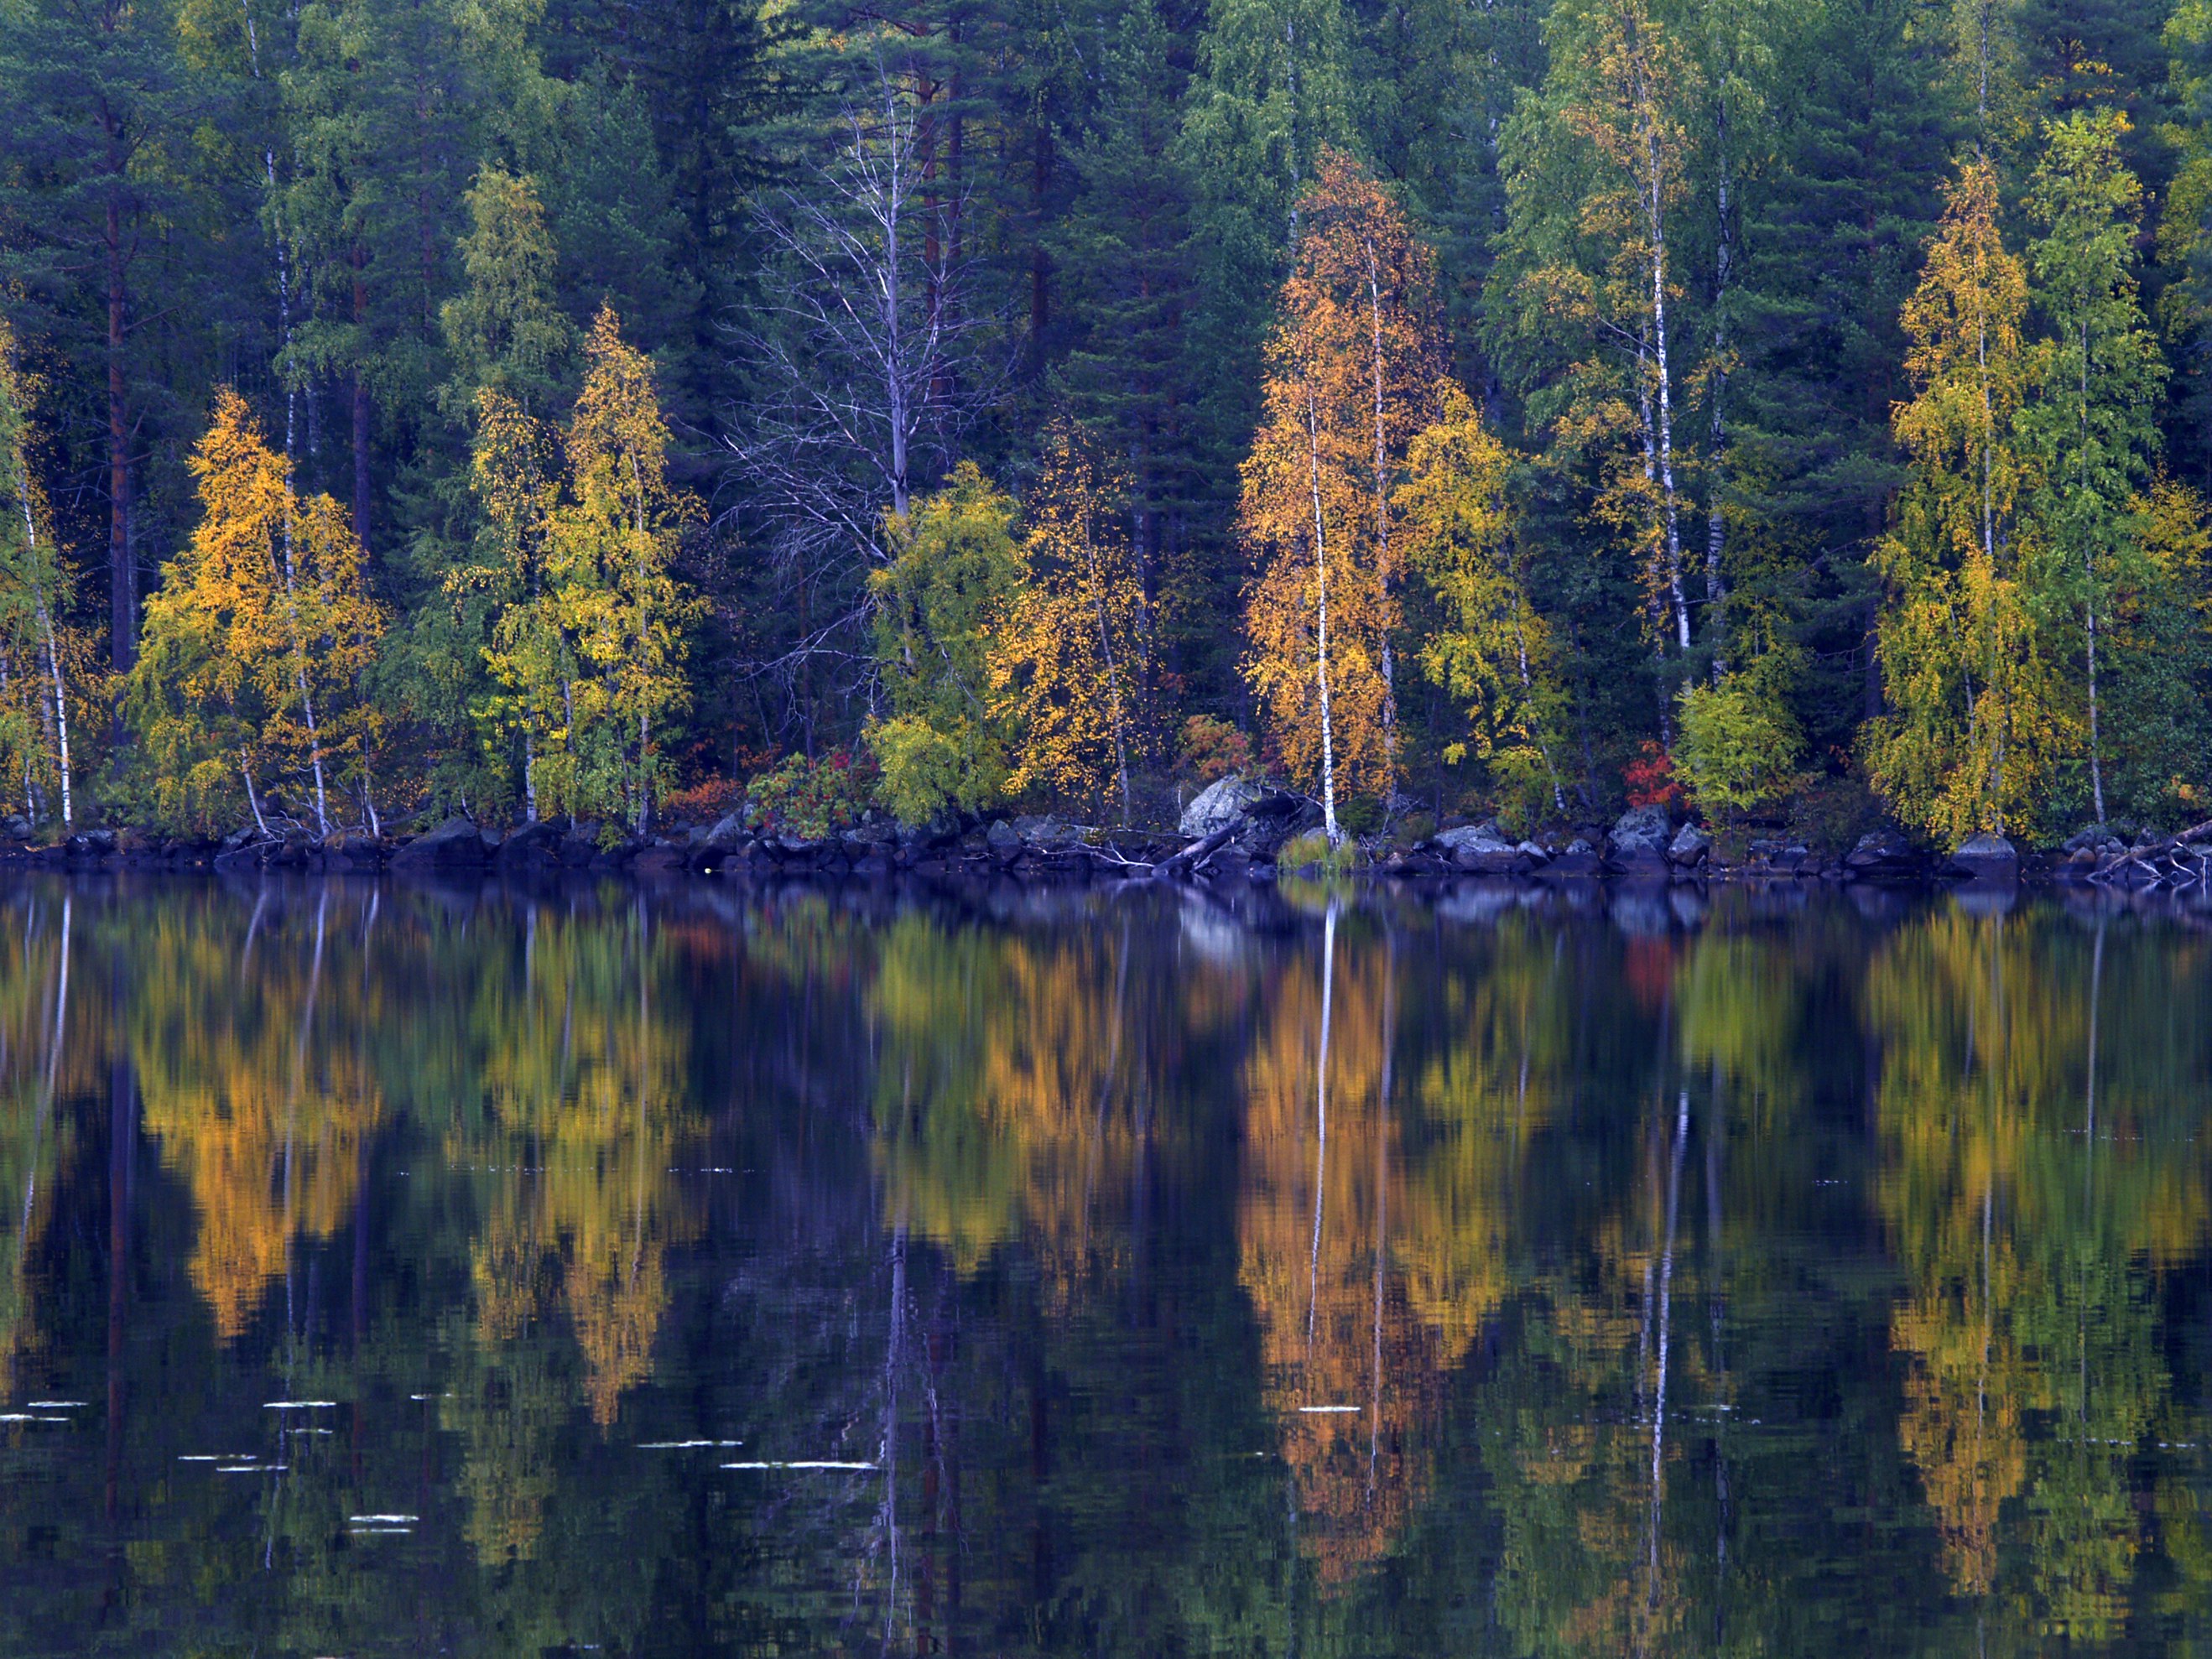 A group of trees next to the rocky shore of a lake slowly transition to yellow and orange; Finland autumn 